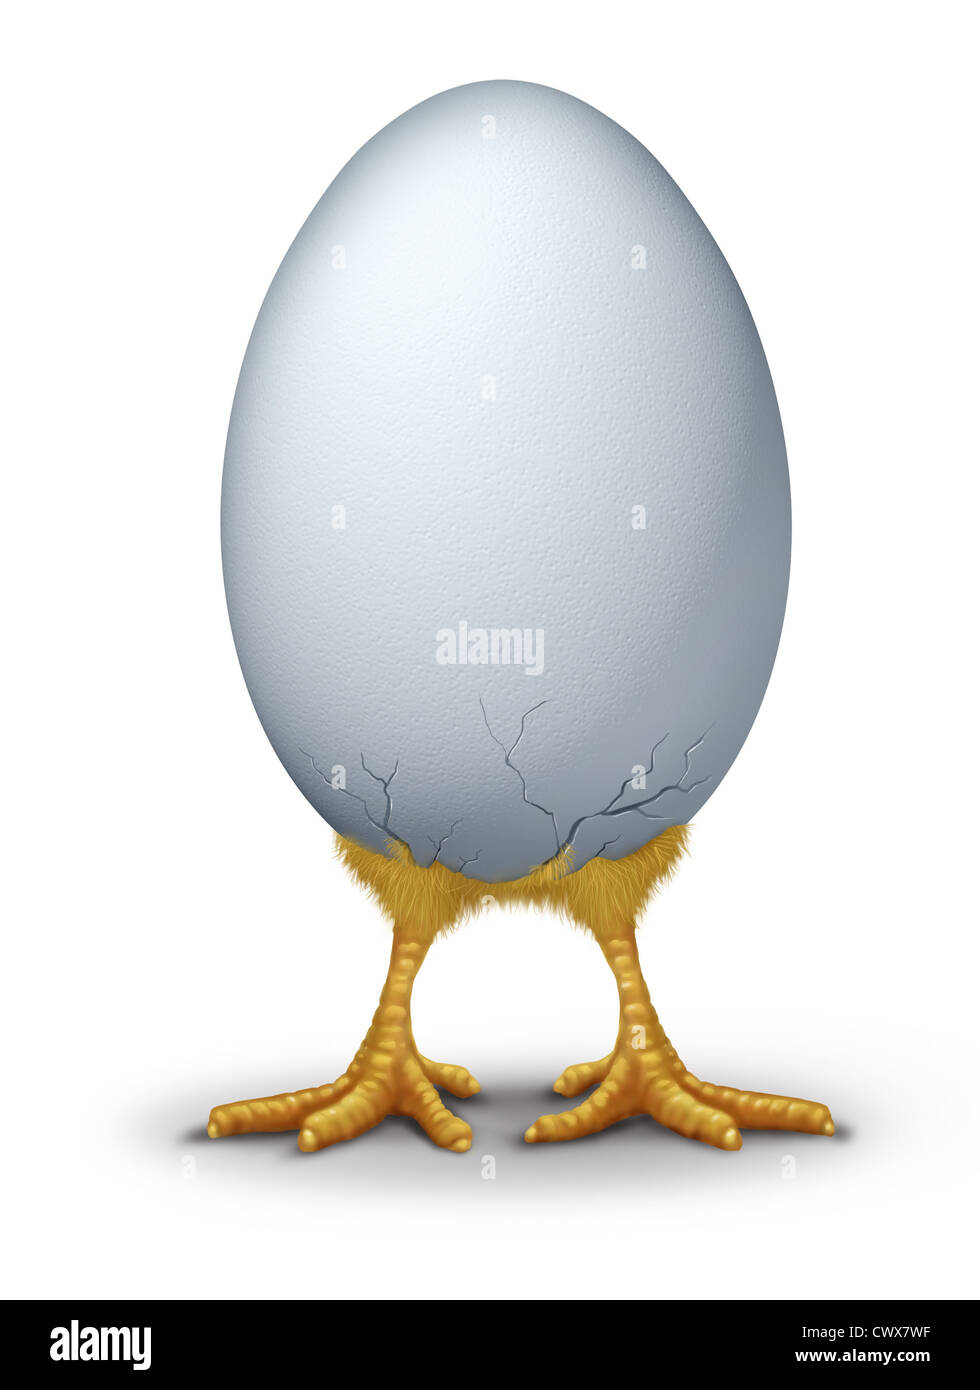 Funny easter egg with humorous hatchling baby bird chick breaking through the new shell showing new life. Stock Photo